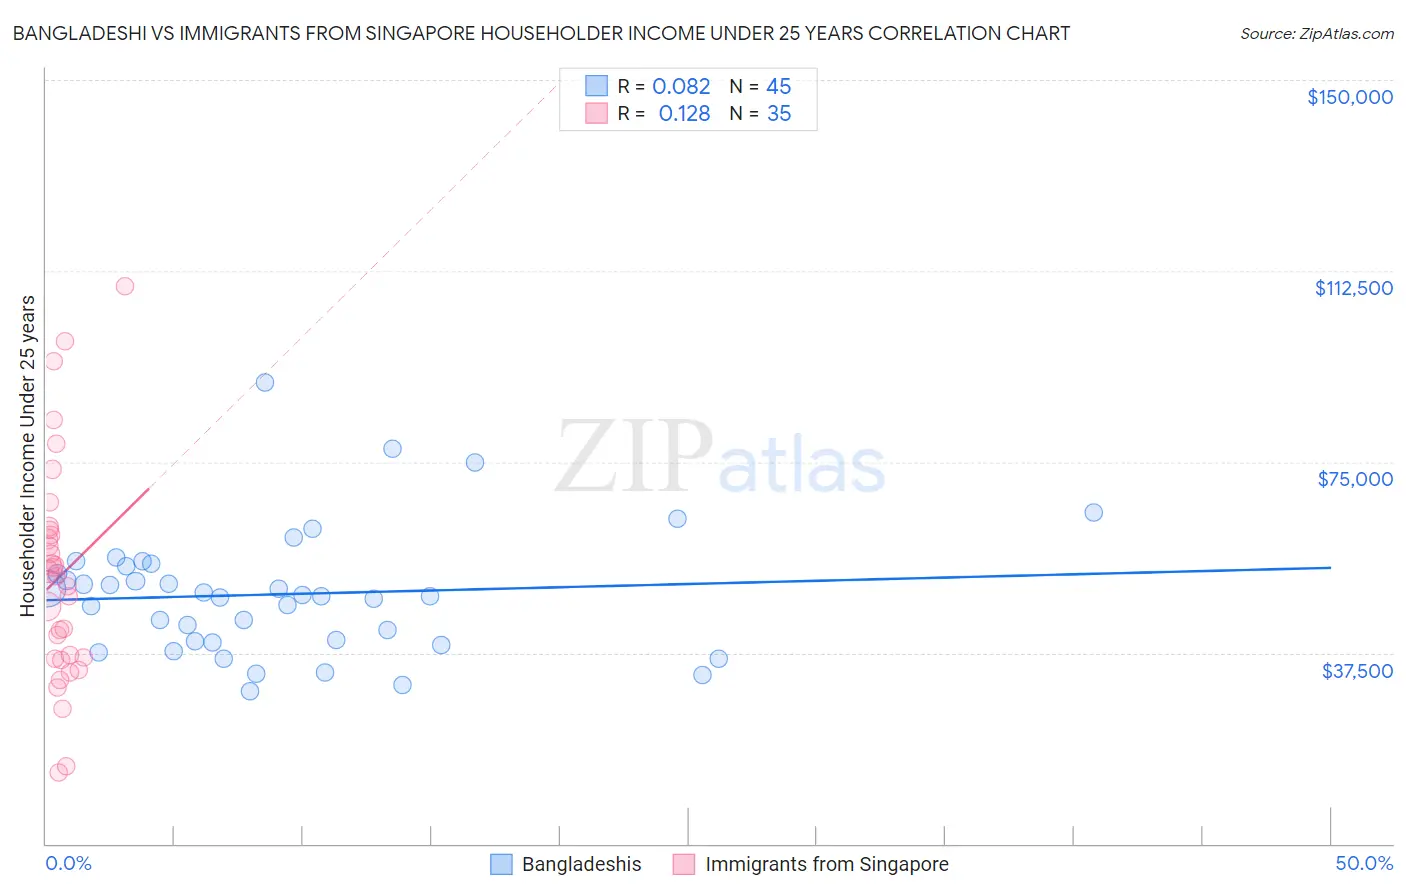 Bangladeshi vs Immigrants from Singapore Householder Income Under 25 years